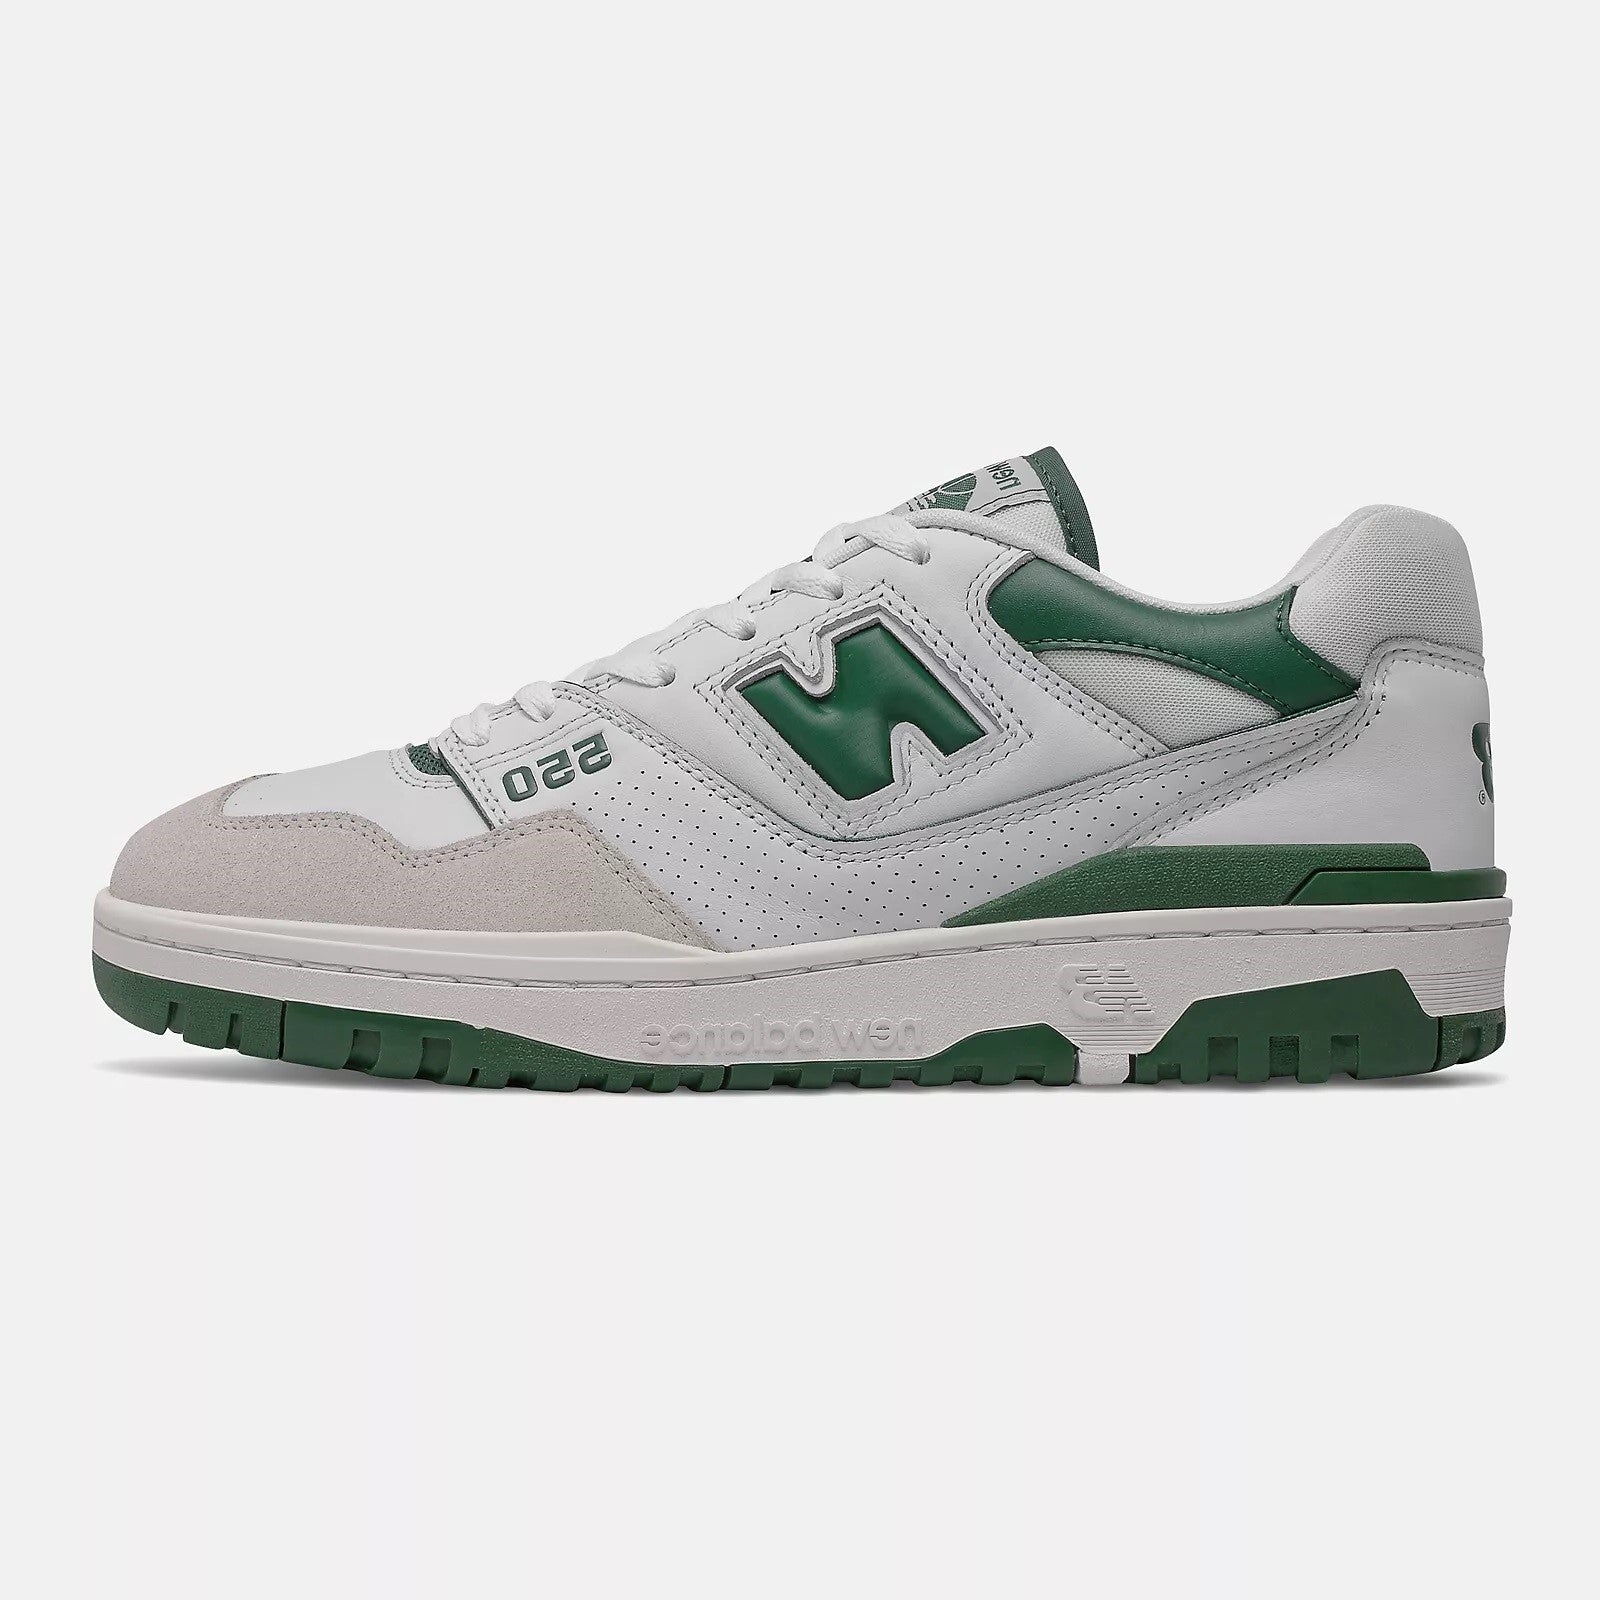 New Balance 550 White Green - Lit Fitters Portugal